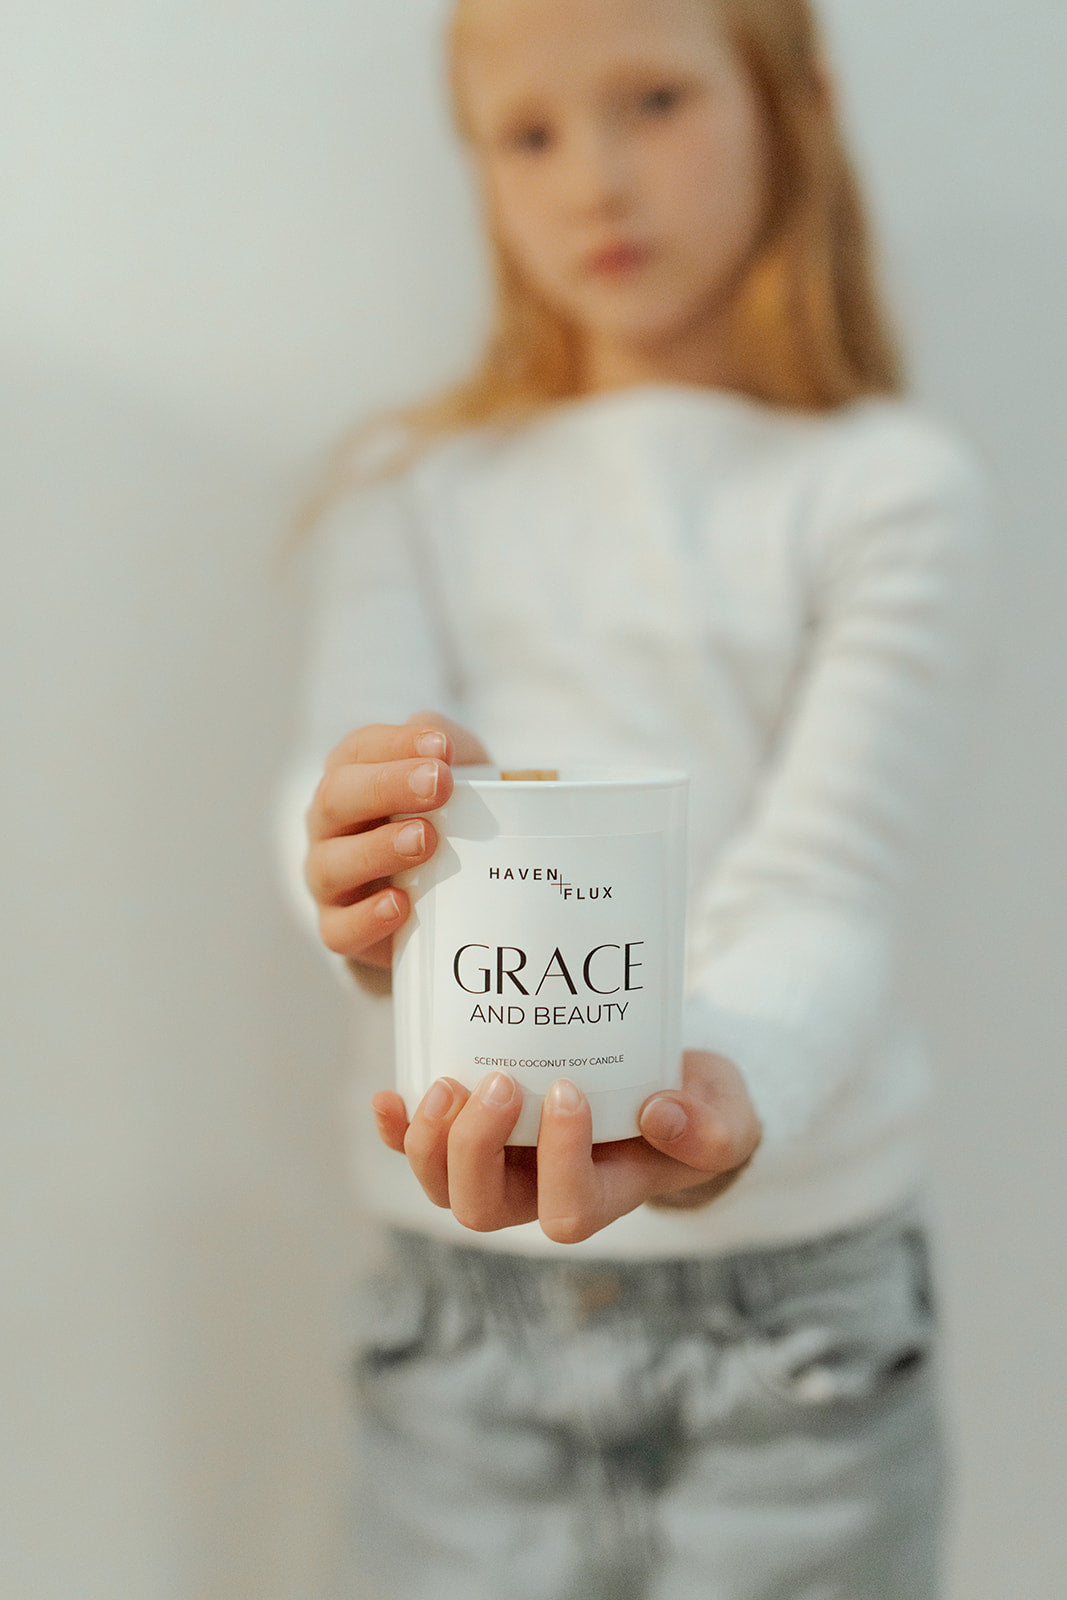 Grace Wooden Wick Candle featuring a luxurious blend of orange blossoms, dewy gardenia, and spiced vanilla scent notes. Crafted with high-quality, non-toxic ingredients, this candle embodies the essence of beauty and grace in its various forms, from delicate blooms to warm spices.